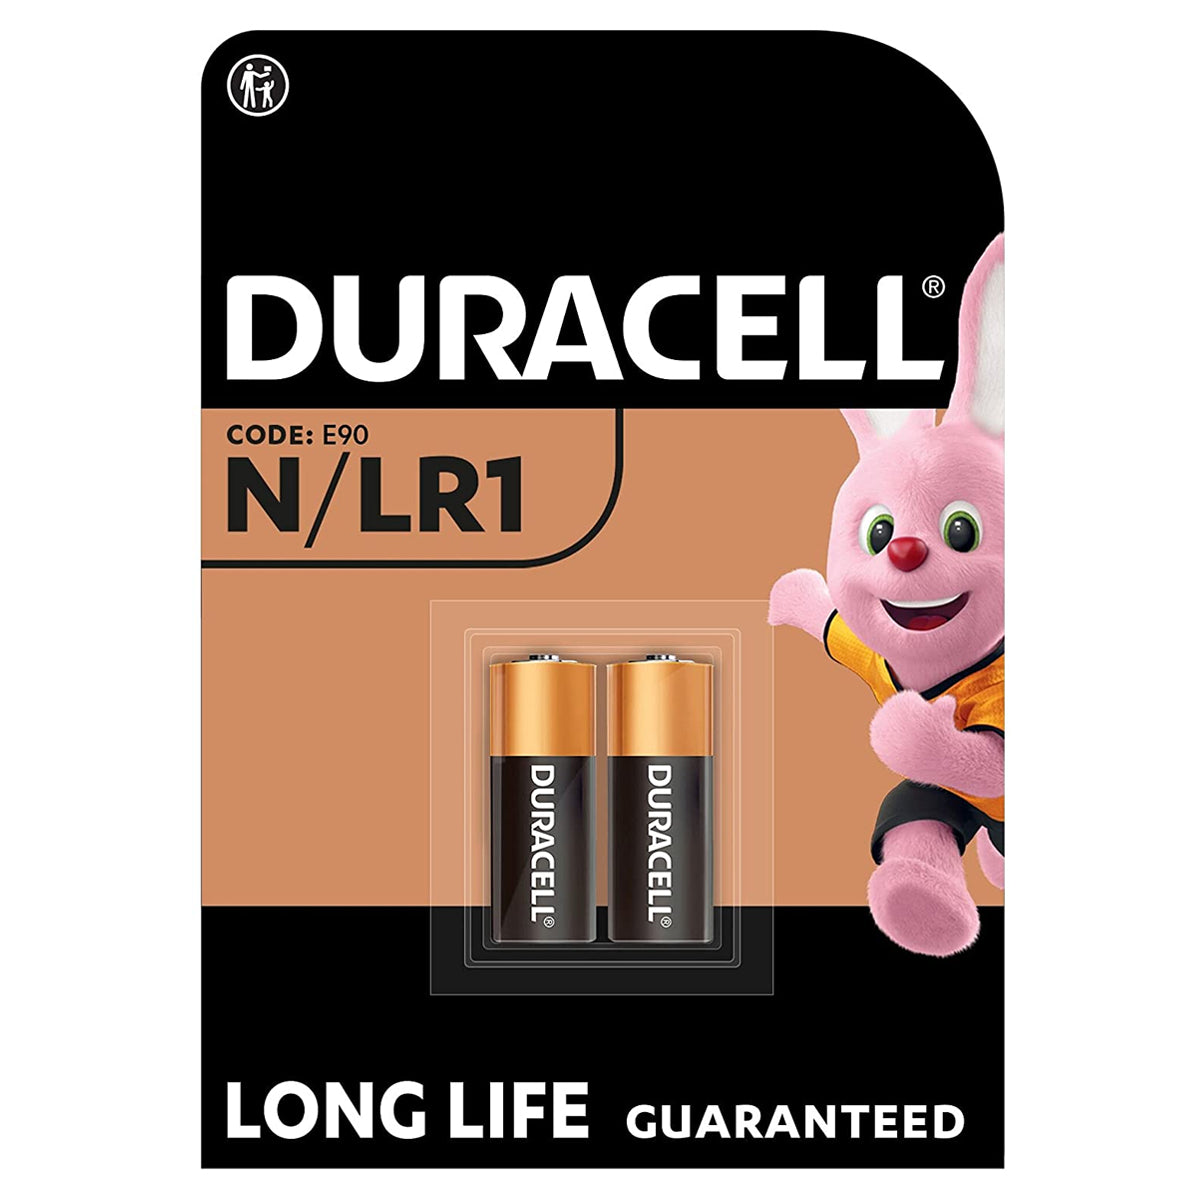 Duracell - N/LR1 Batteries - 2 Pack - Continental Food Store